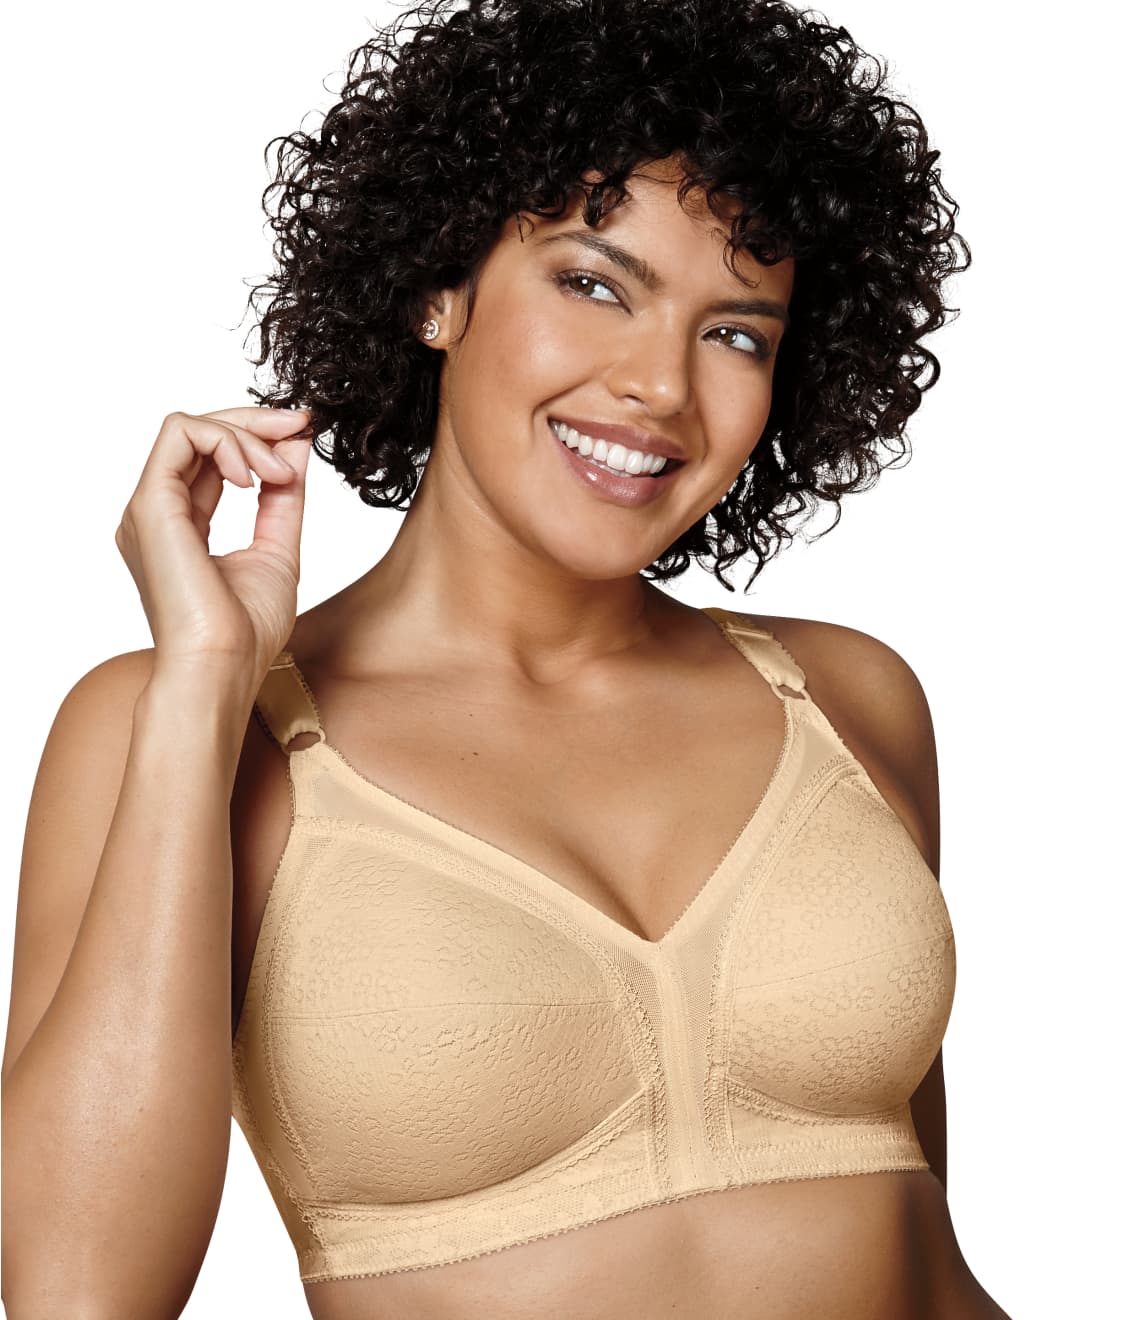 Playtex: 18 Hour Classic Support Wire-Free Bra 2027